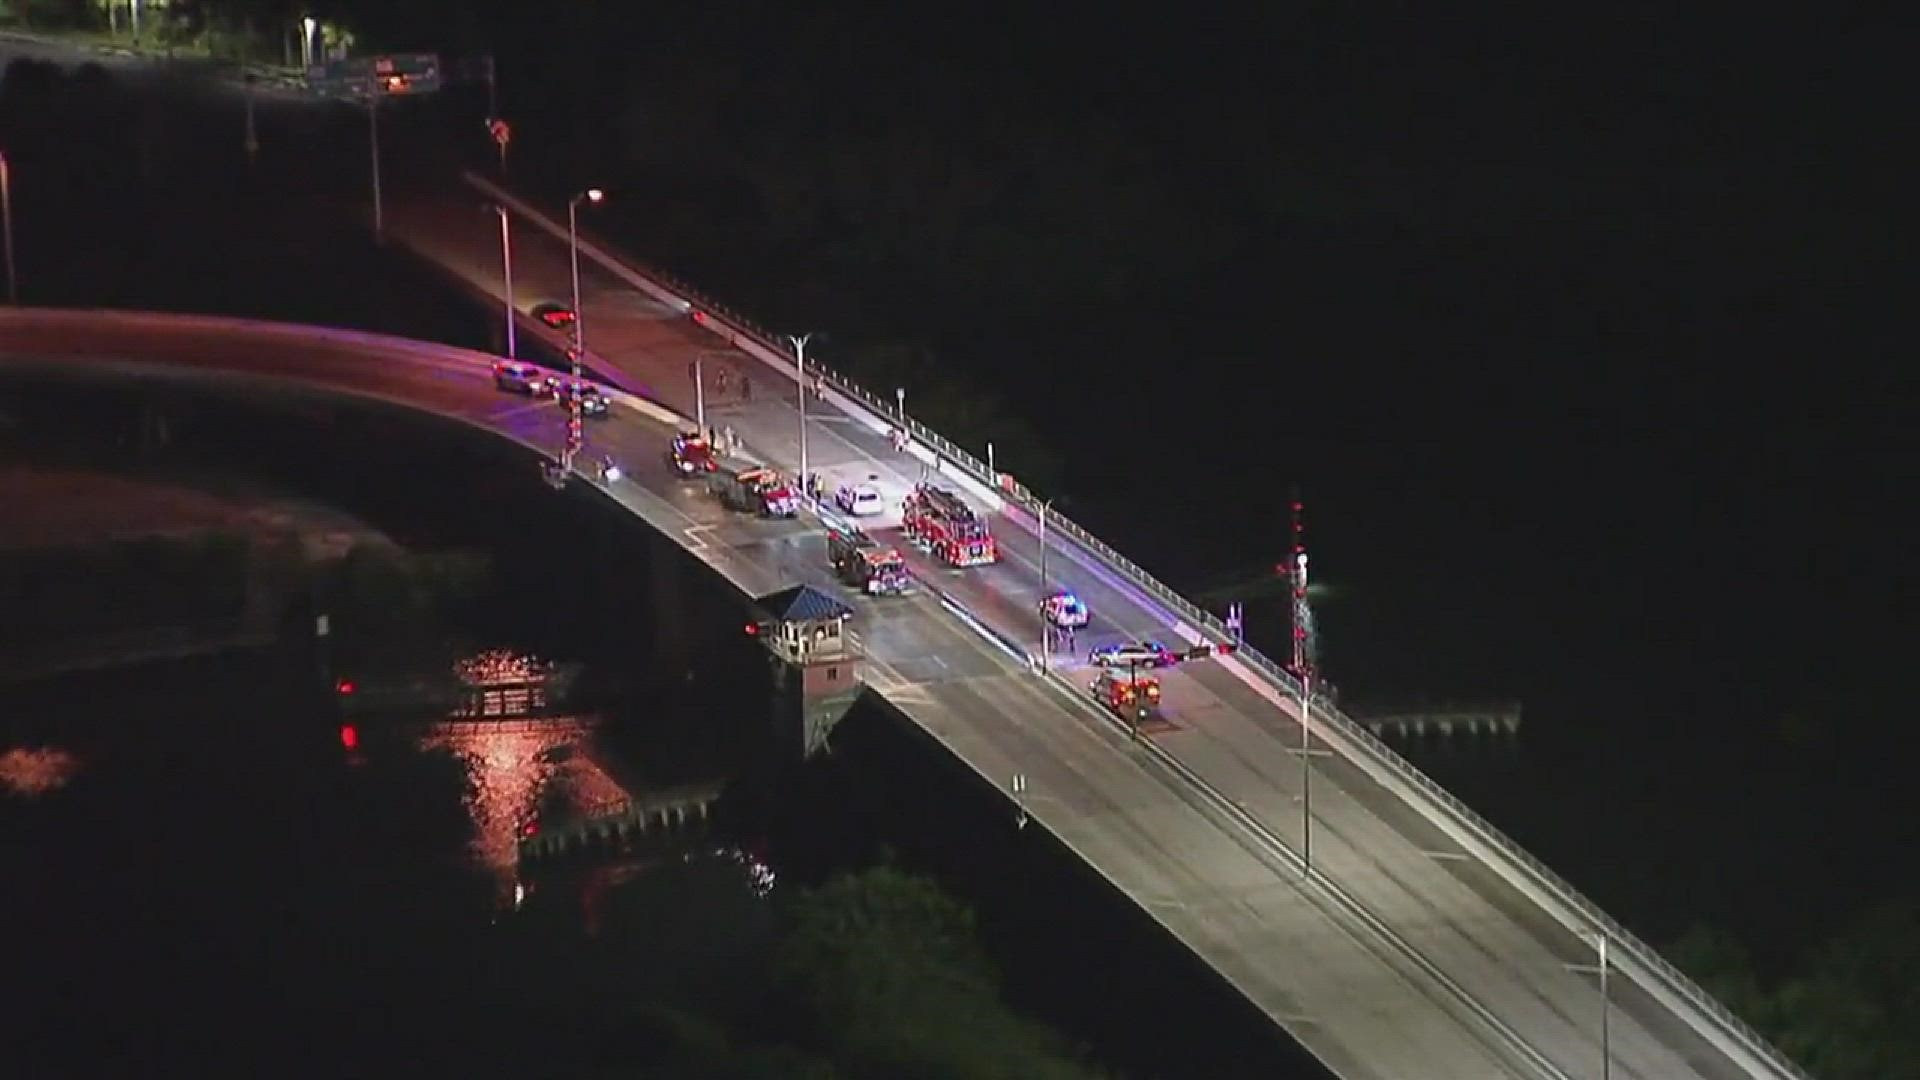 The 60-year-old woman was biking on Park Boulevard Bridge when she lost control of her bicycle.